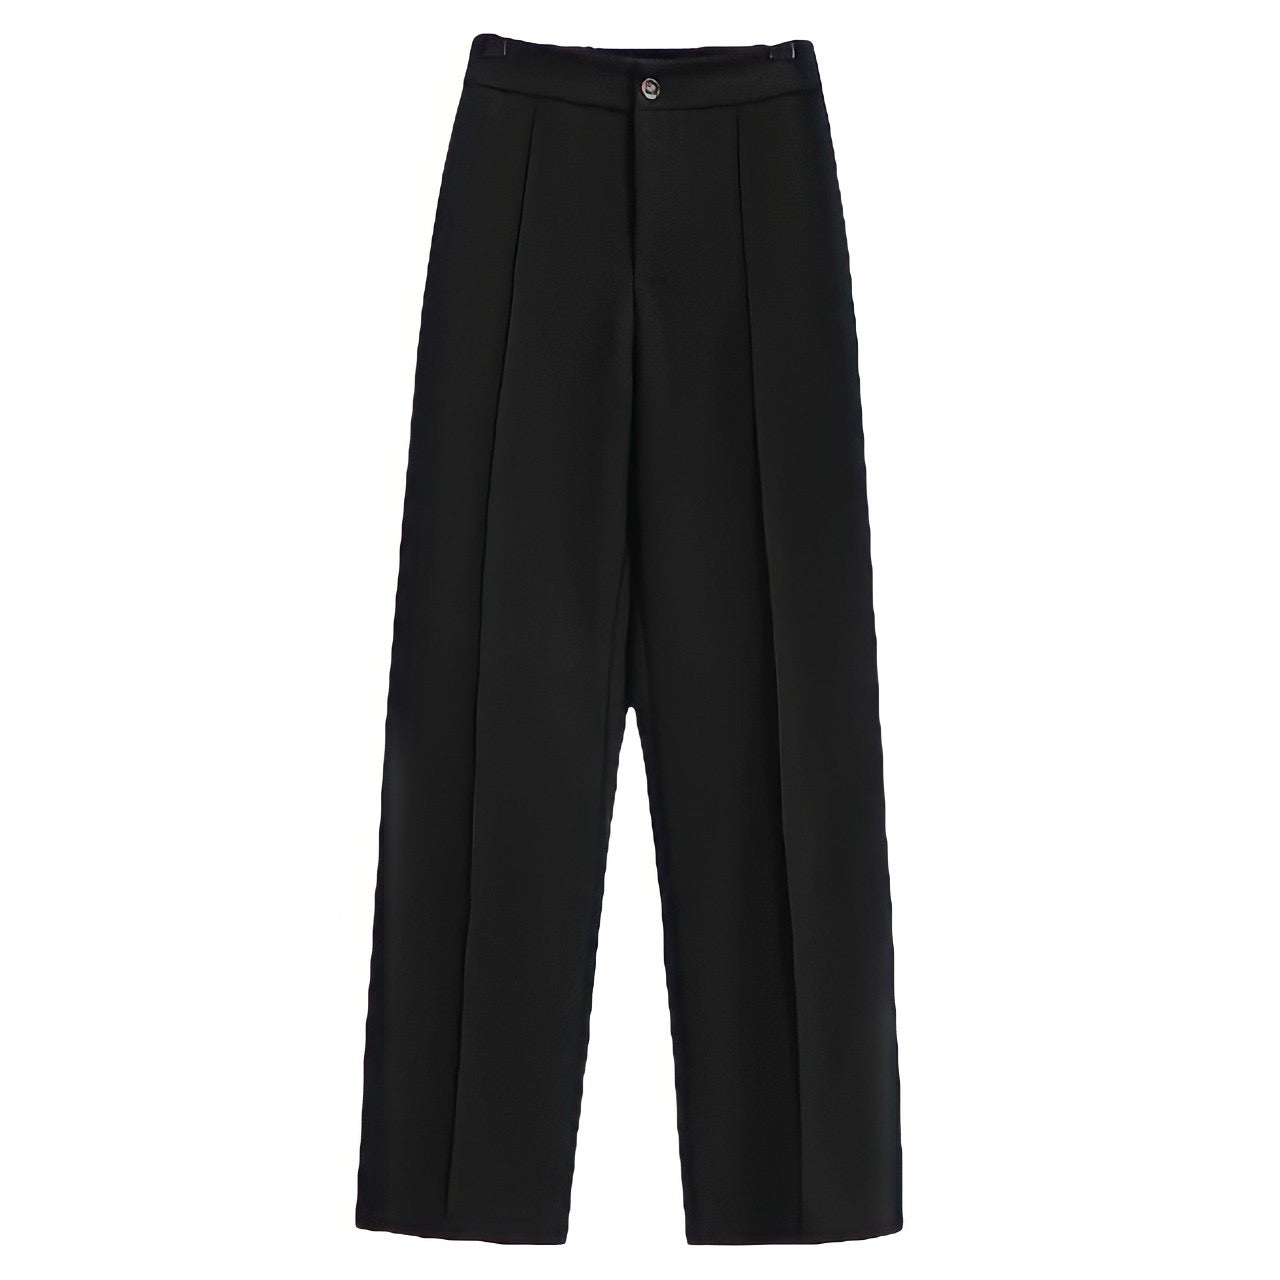 Black Mid-High Rise Pleated Trouser Pants